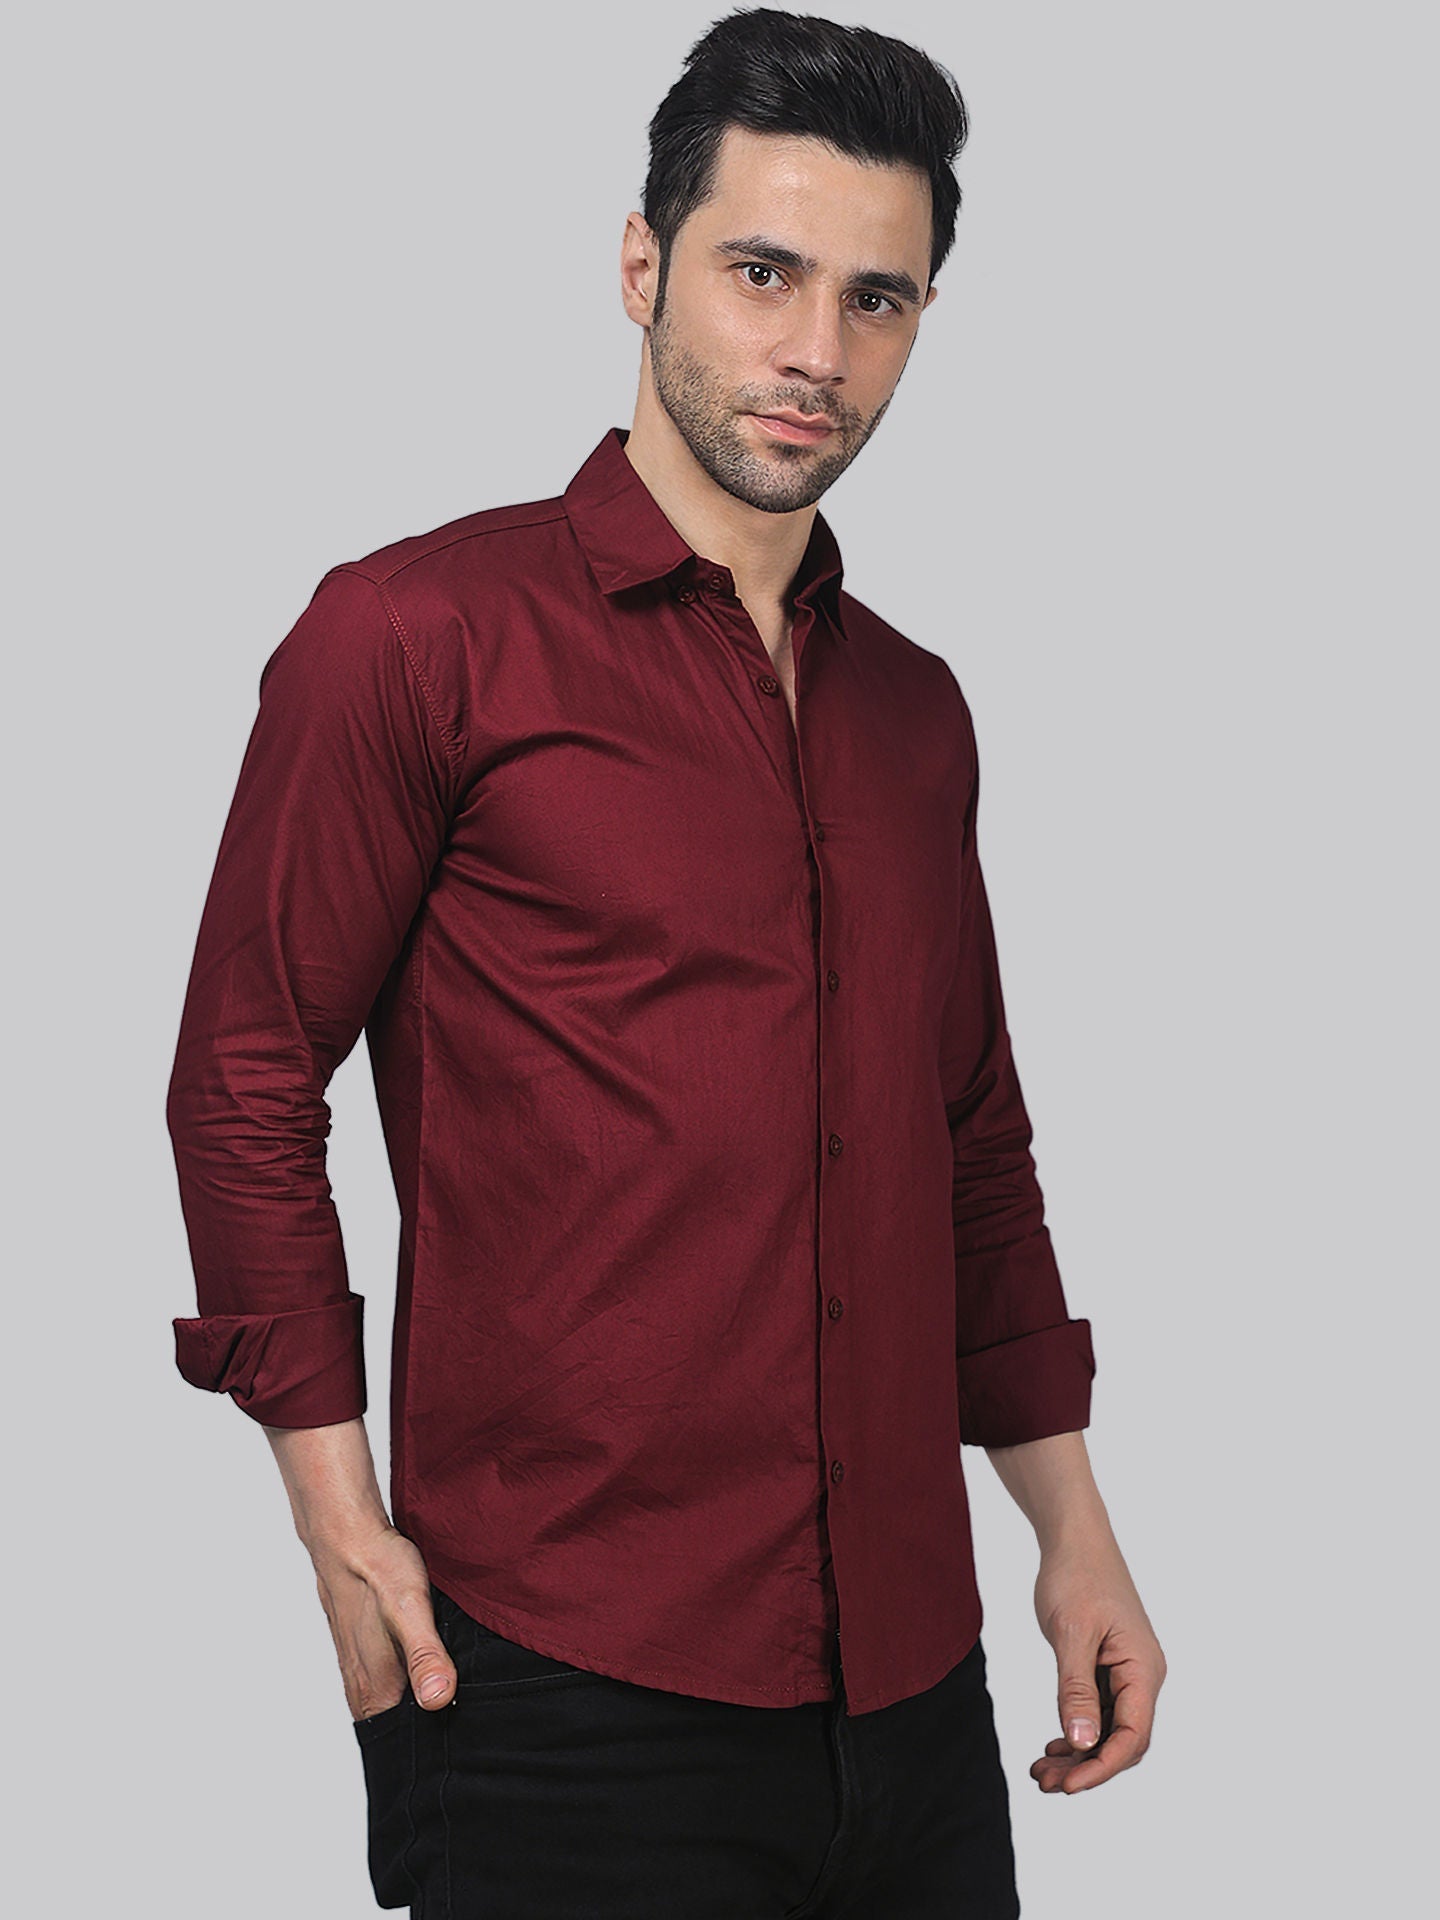 Sleek TryBuy Premium Solid Maroon Cotton Casual Shirt for Men - TryBuy® USA🇺🇸